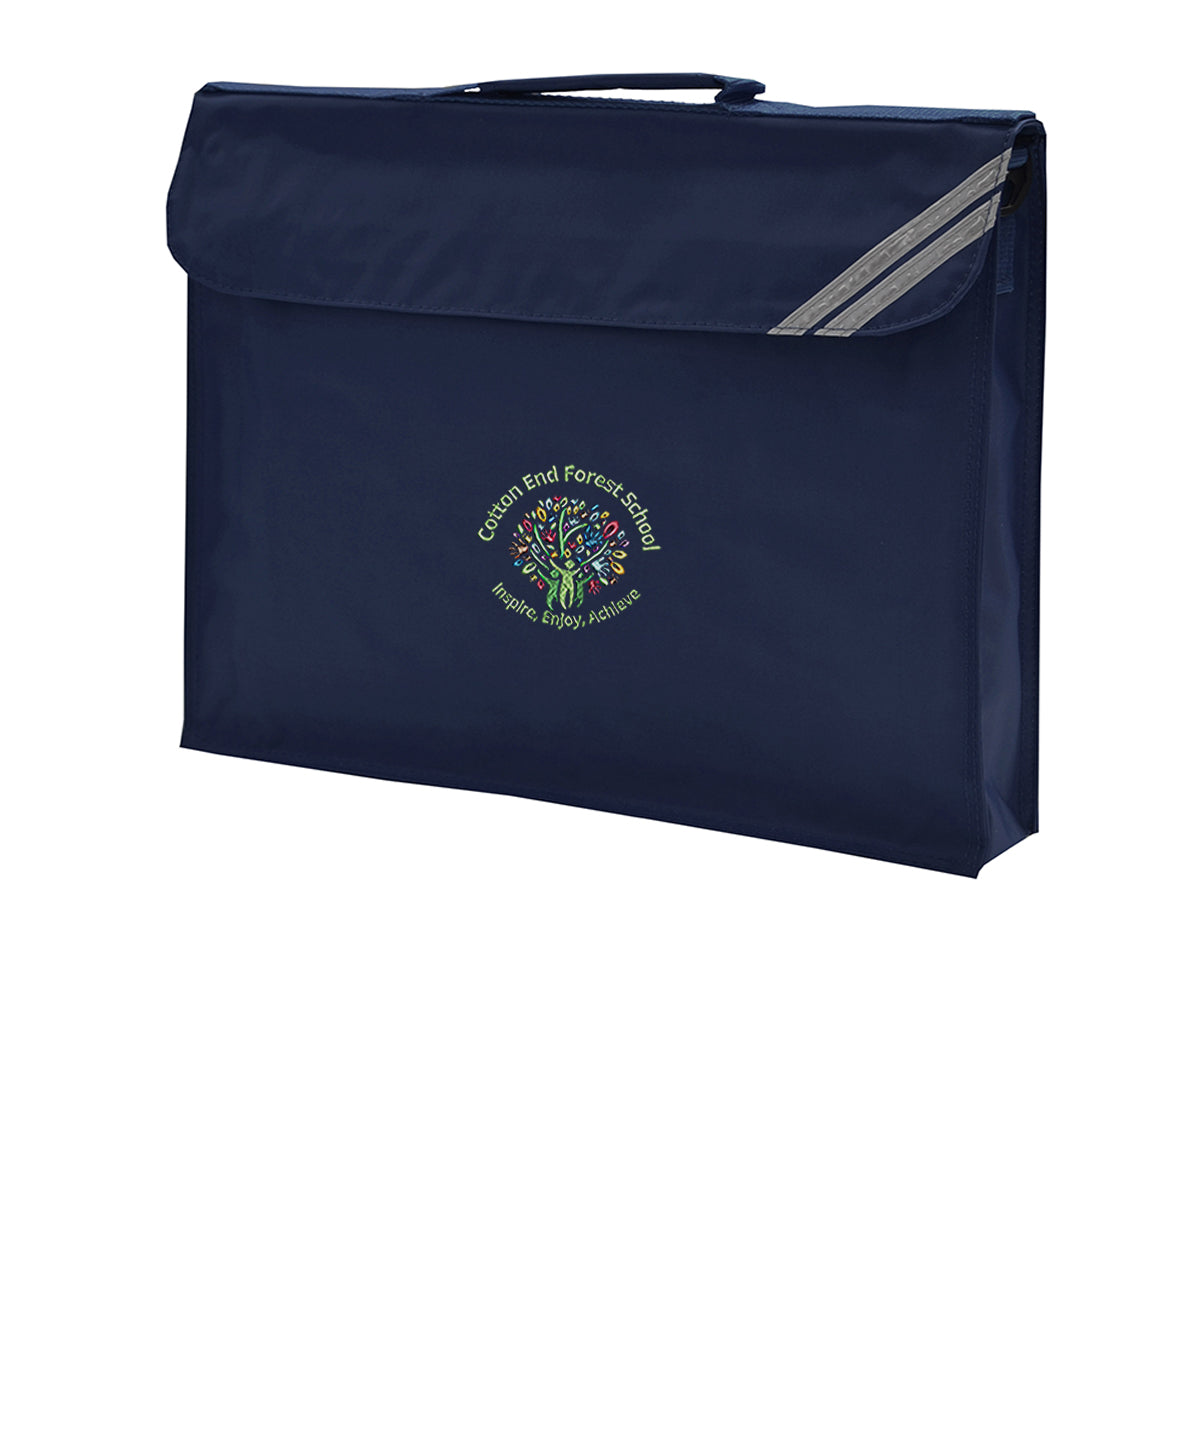 Cotton End Forest School - Navy Book Bag